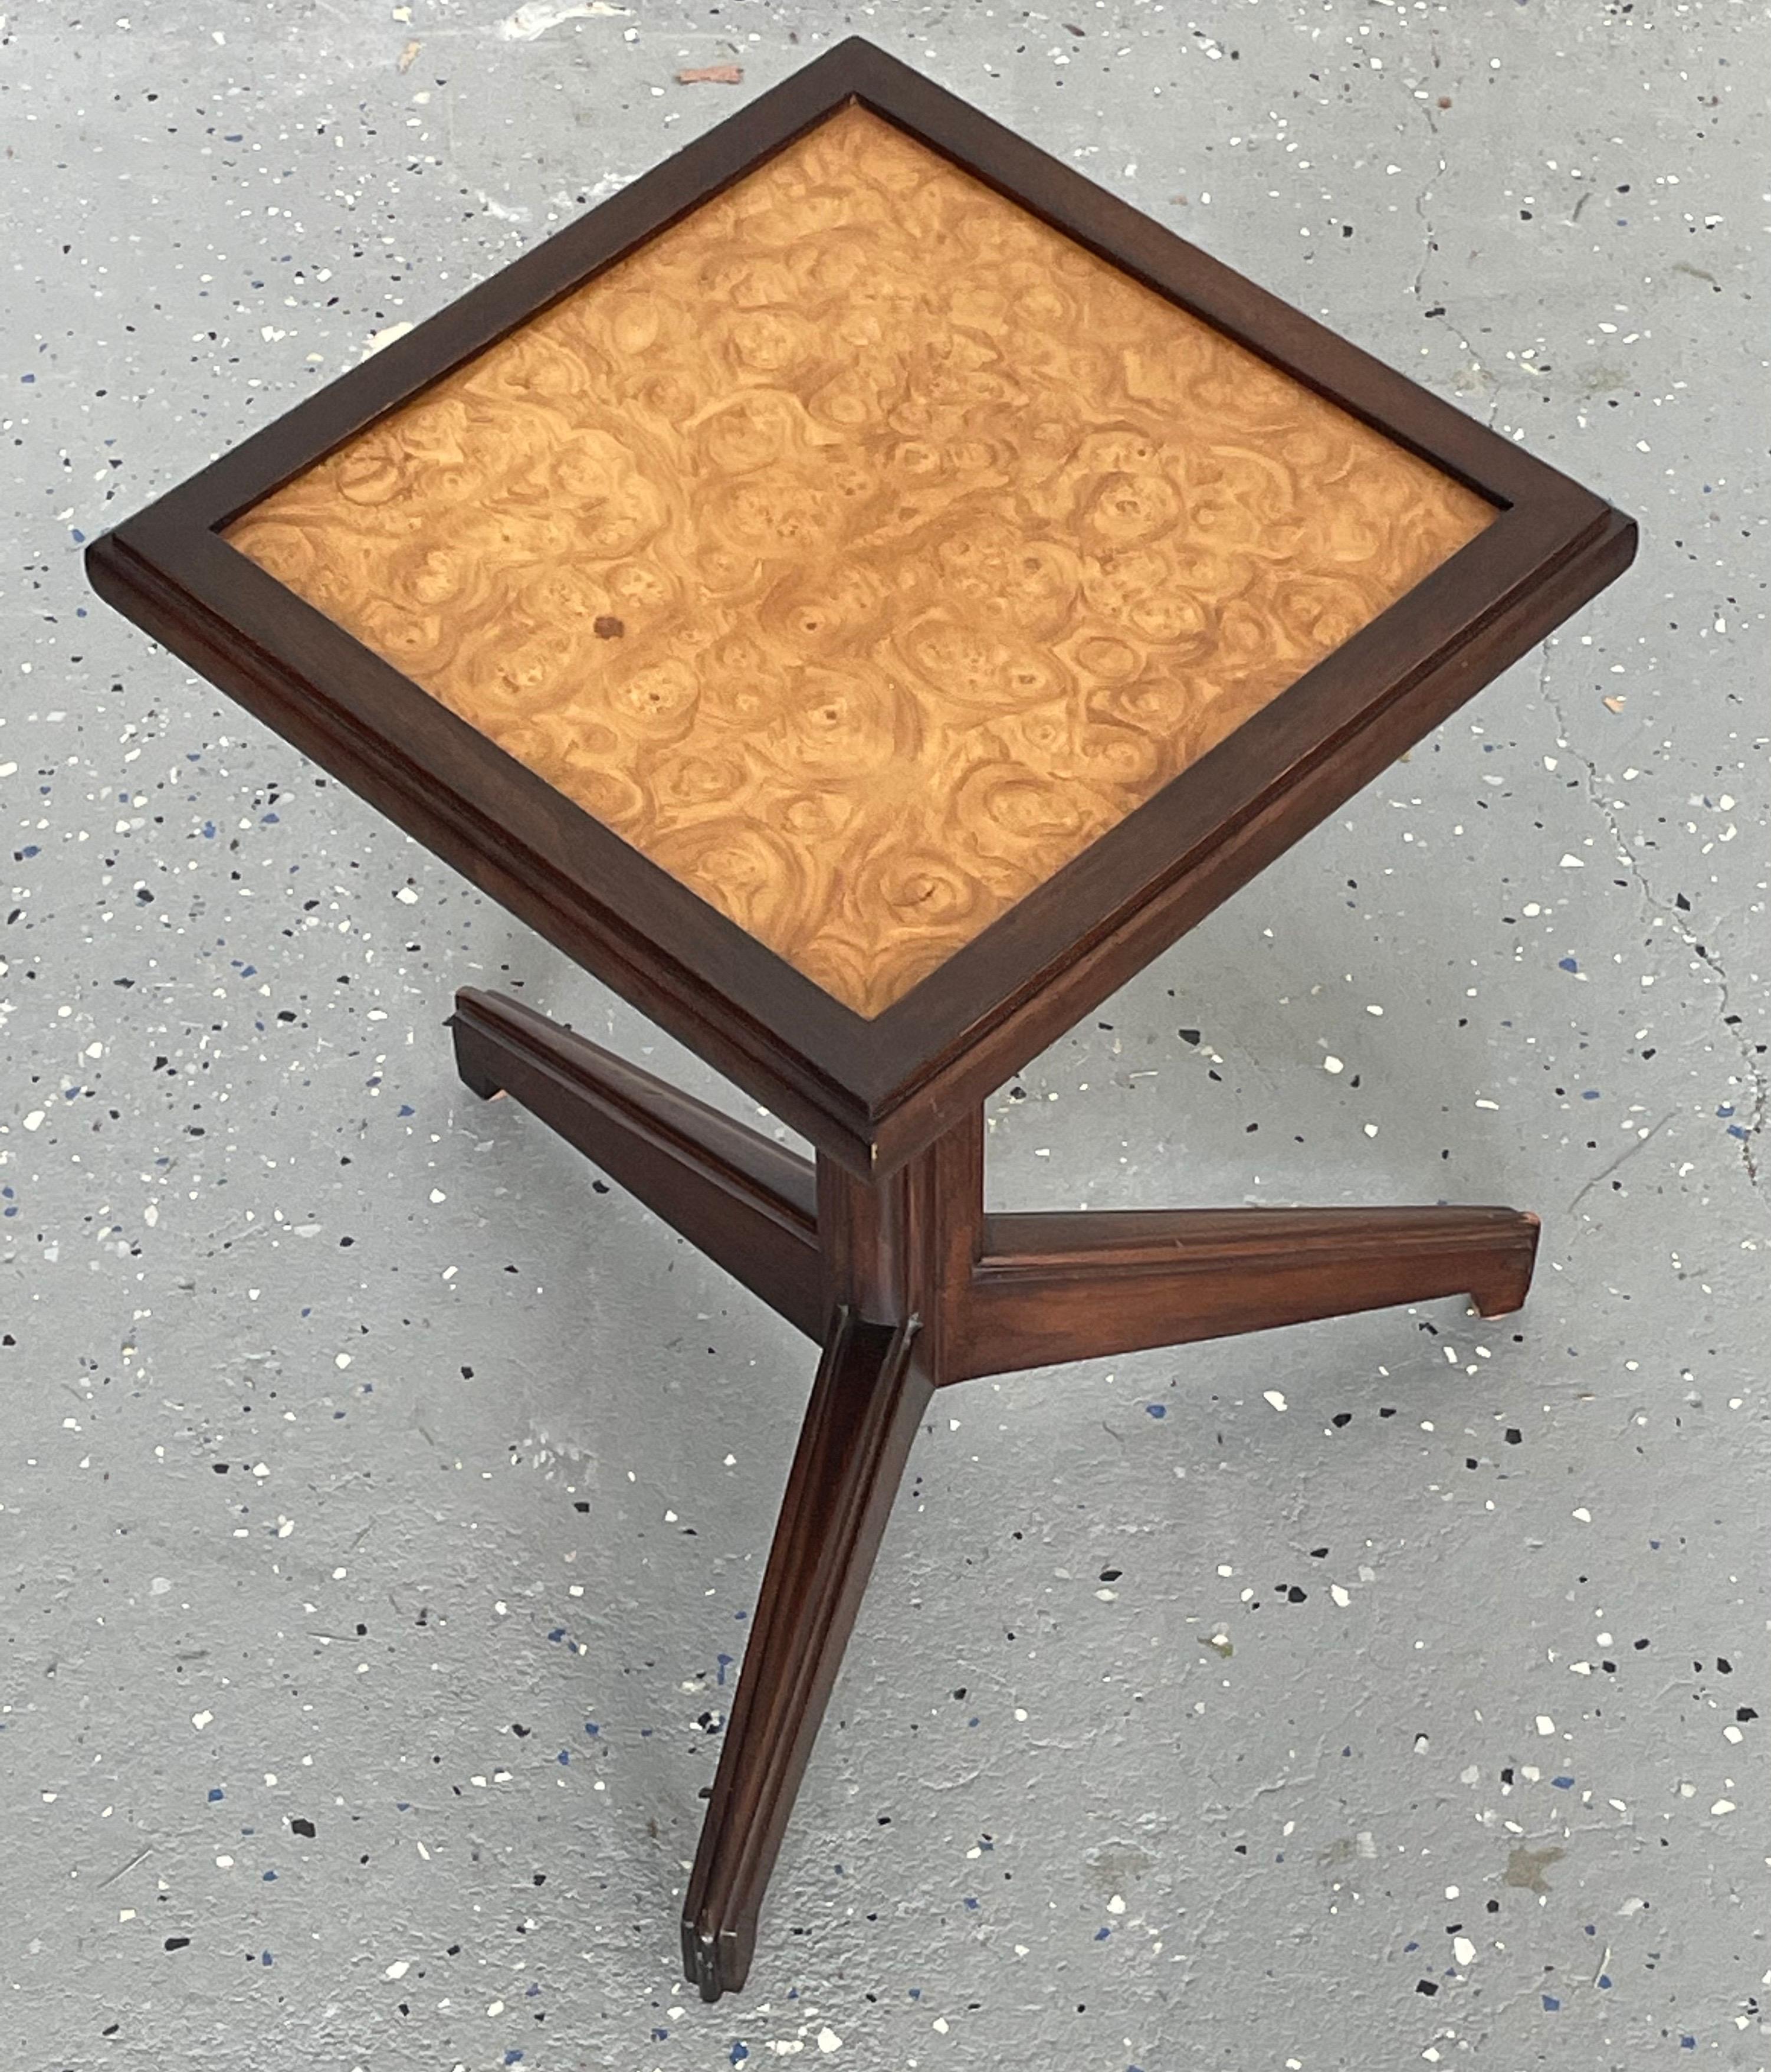 A rare drink table designed by Edward Wormley for a Dunbar’s “Janus” line, circa 1960s. Features a two-tone color palette with dark base and carpathian elm burl top.